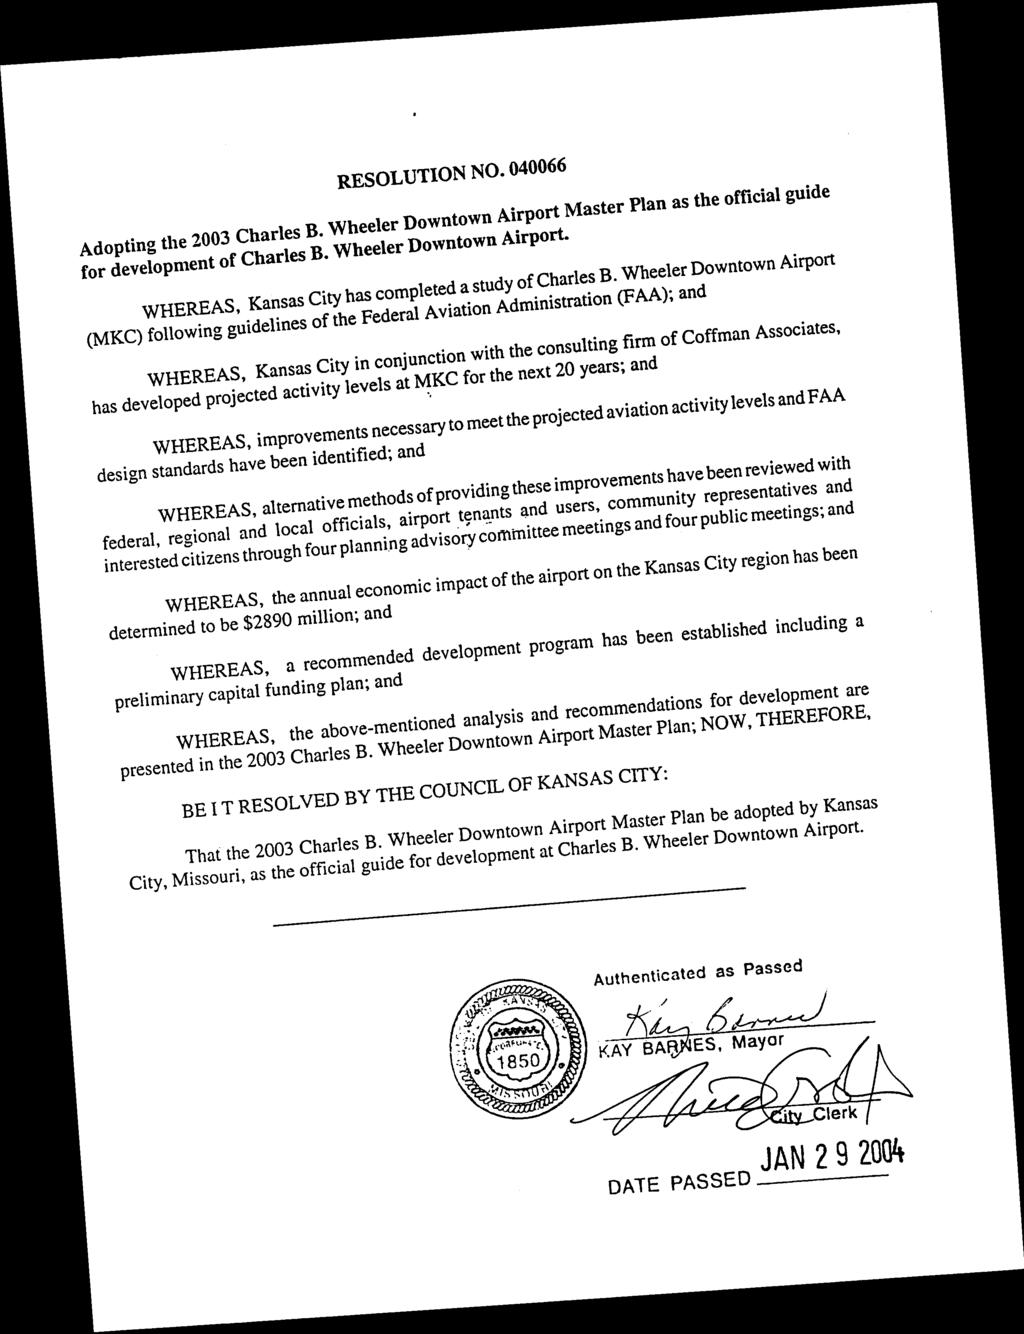 RESOLUTION NO. 040066 Adopting the 2003 Charles B. Wheeler Downtown Airport Master Plan as the official guide for development of Charles B. Wheeler Downtown Airport. WHEREAS.